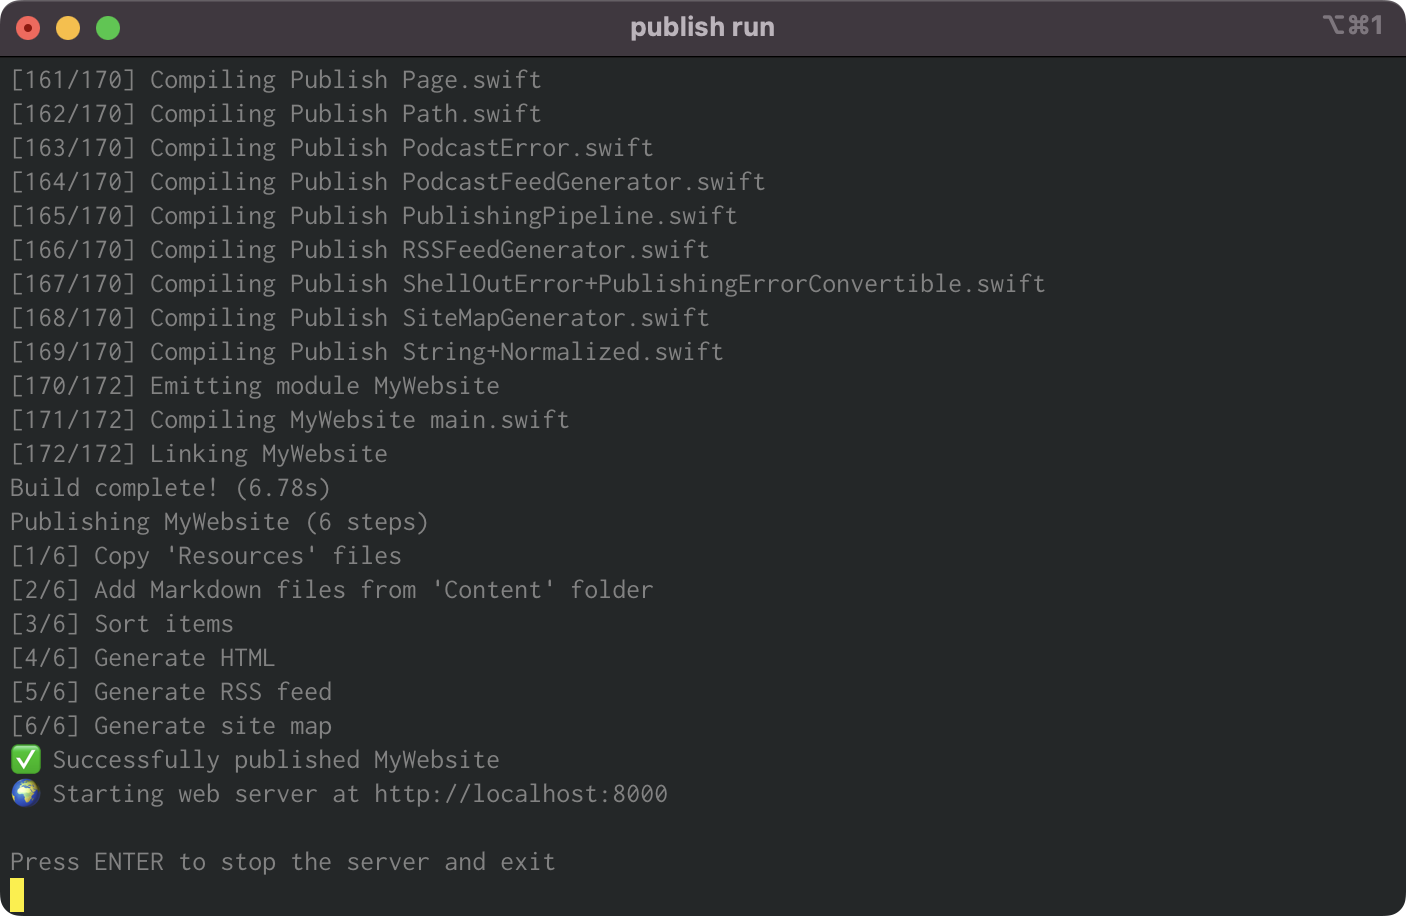 Command line output of running publish run